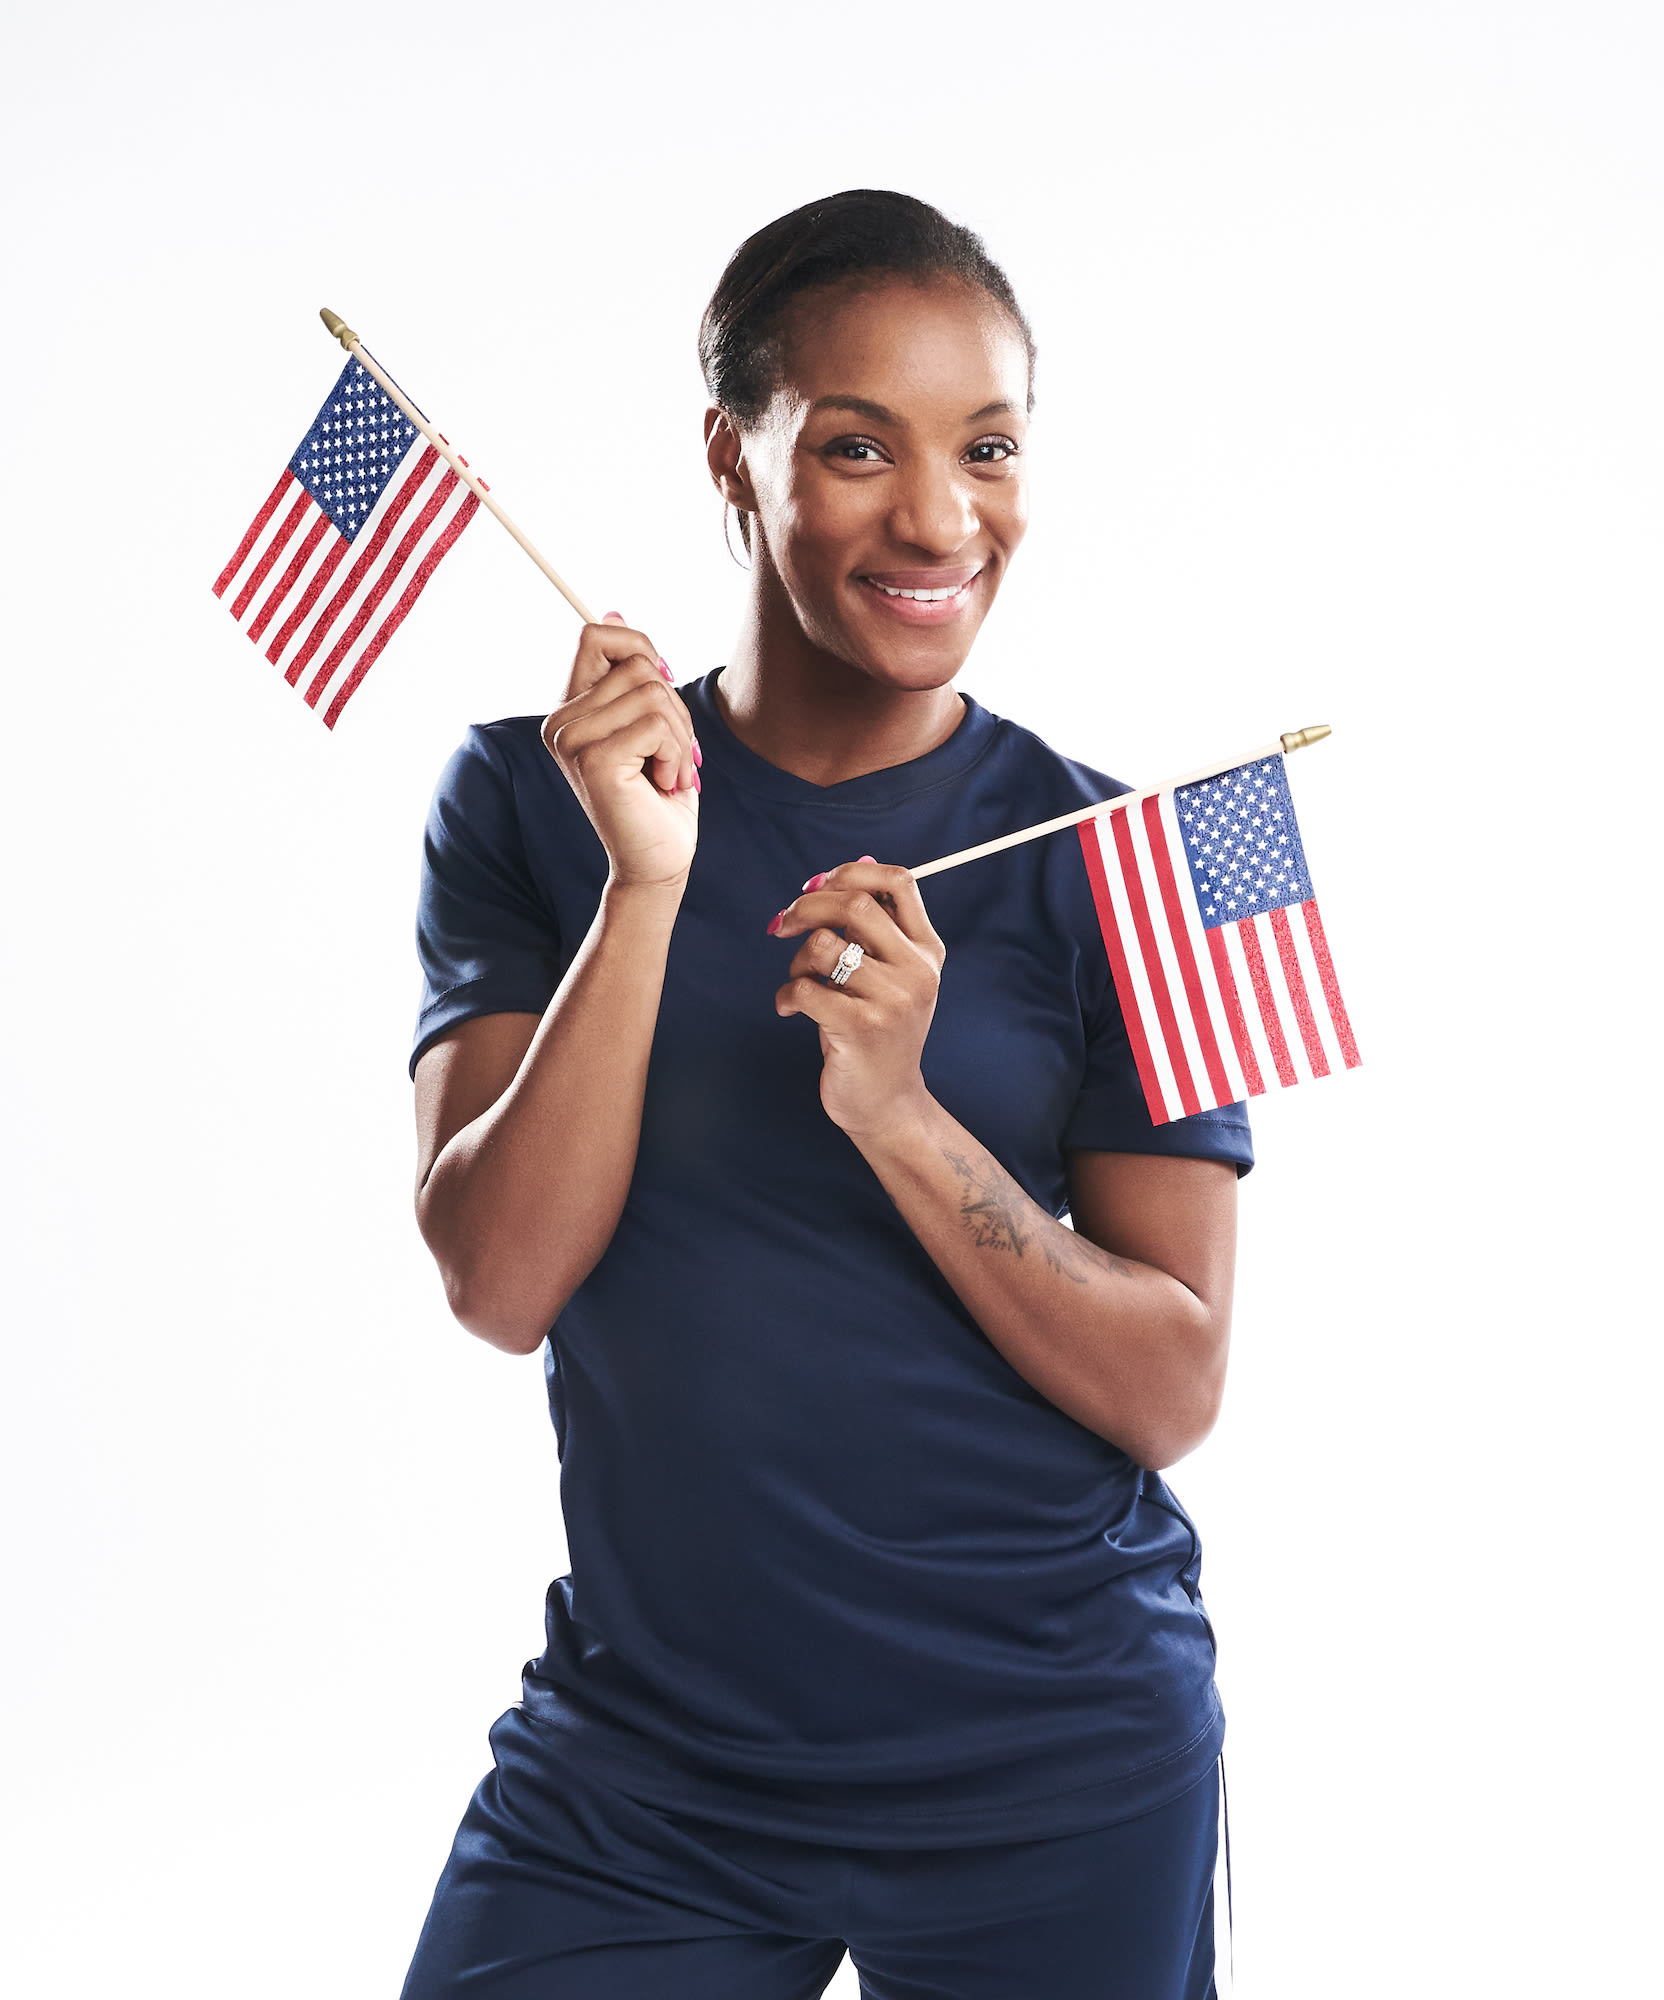 Crystal Dunn, USWNTPA member and midfielder for the Portland Thorns